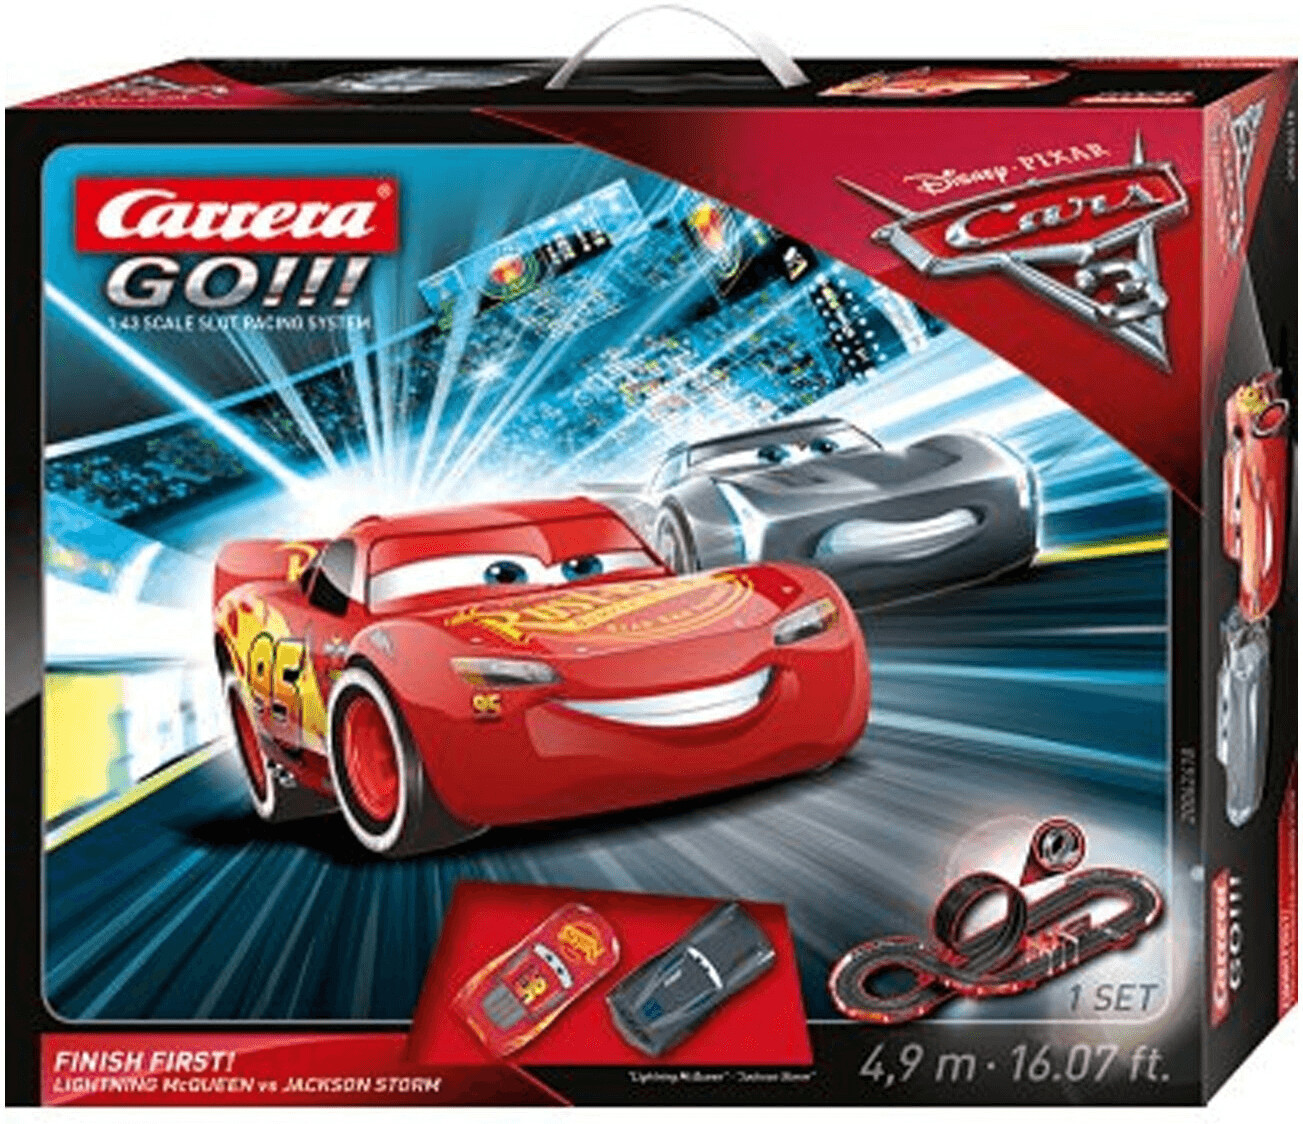 Circuit Cars Carrera First pas cher - Achat neuf et occasion